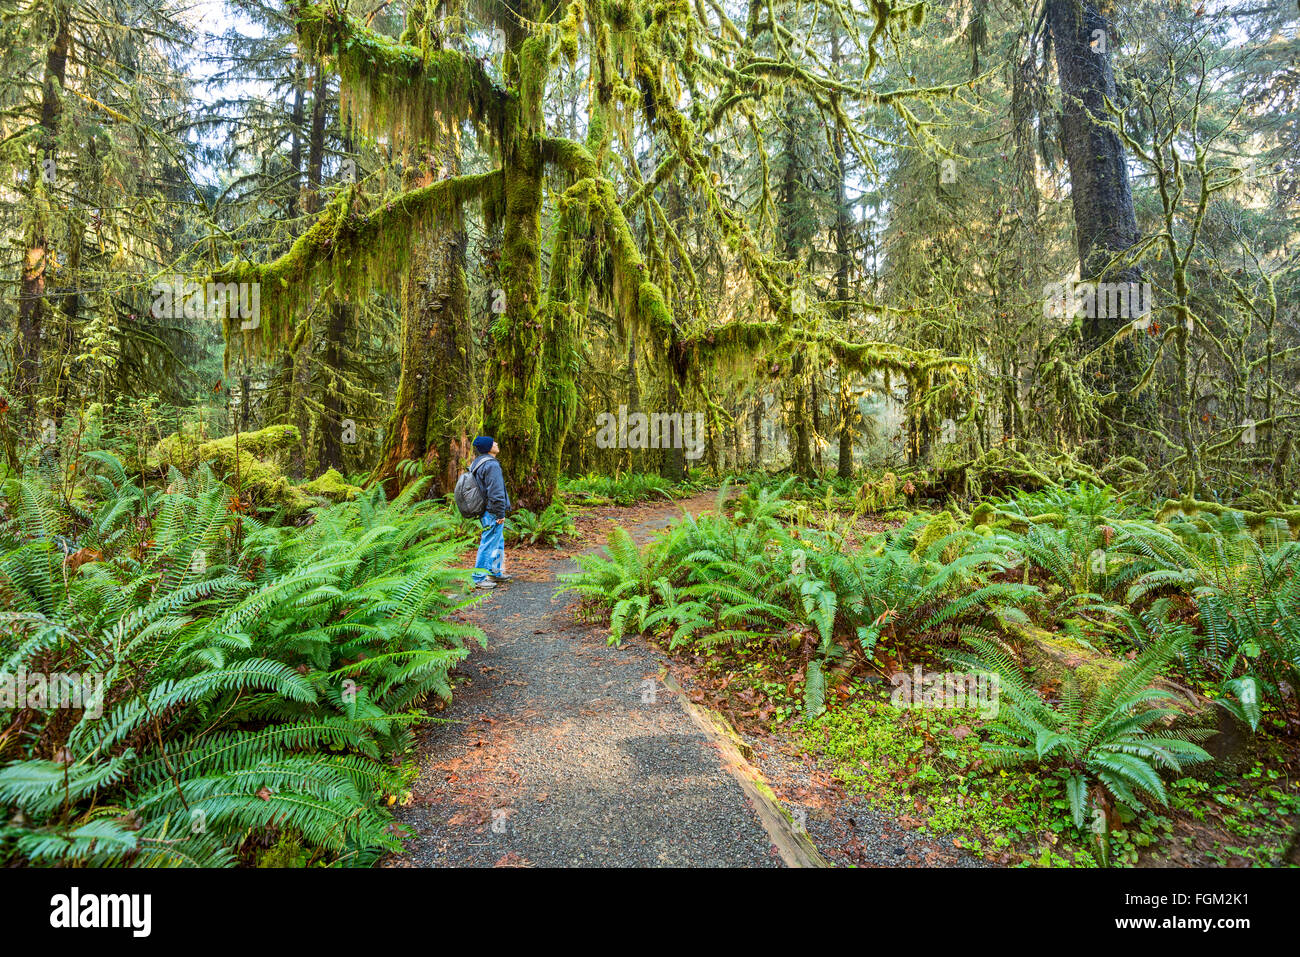 The Hoh Rainforest of Olympic National Park in Washington State. Stock Photo